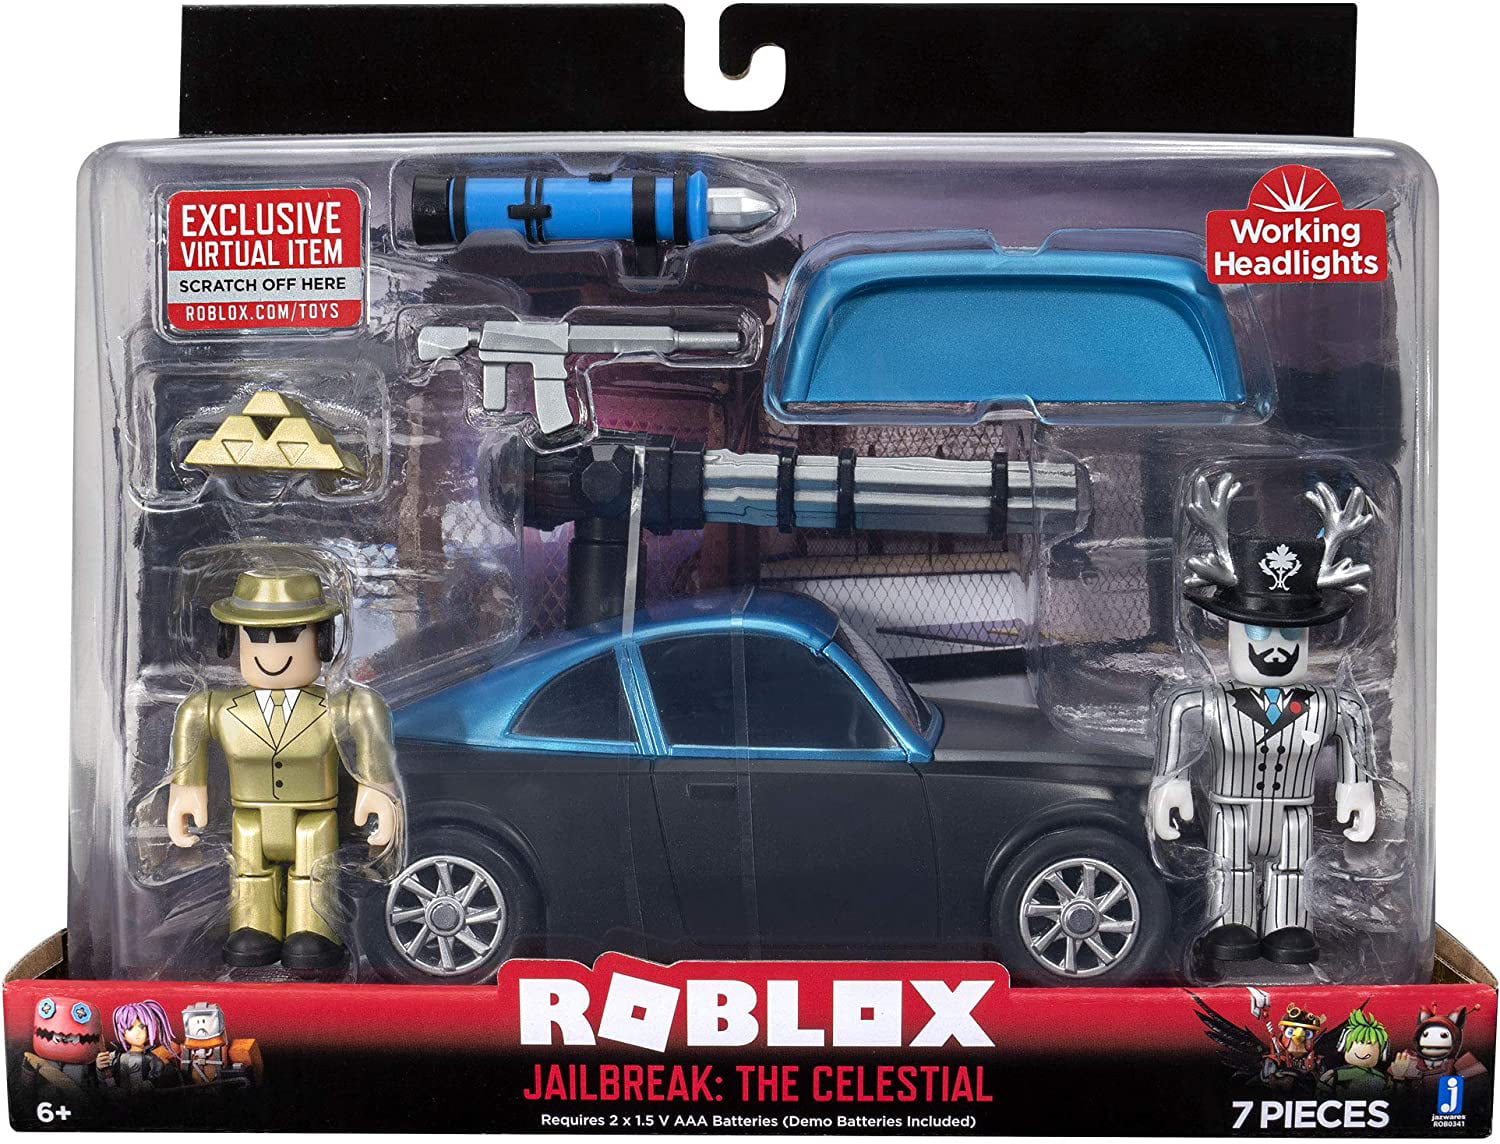 Roblox Action Collection Jailbreak The Celestial Deluxe Vehicle Includes Exclusive Virtual Item Walmart Com Walmart Com - roblox jailbreak convertible location